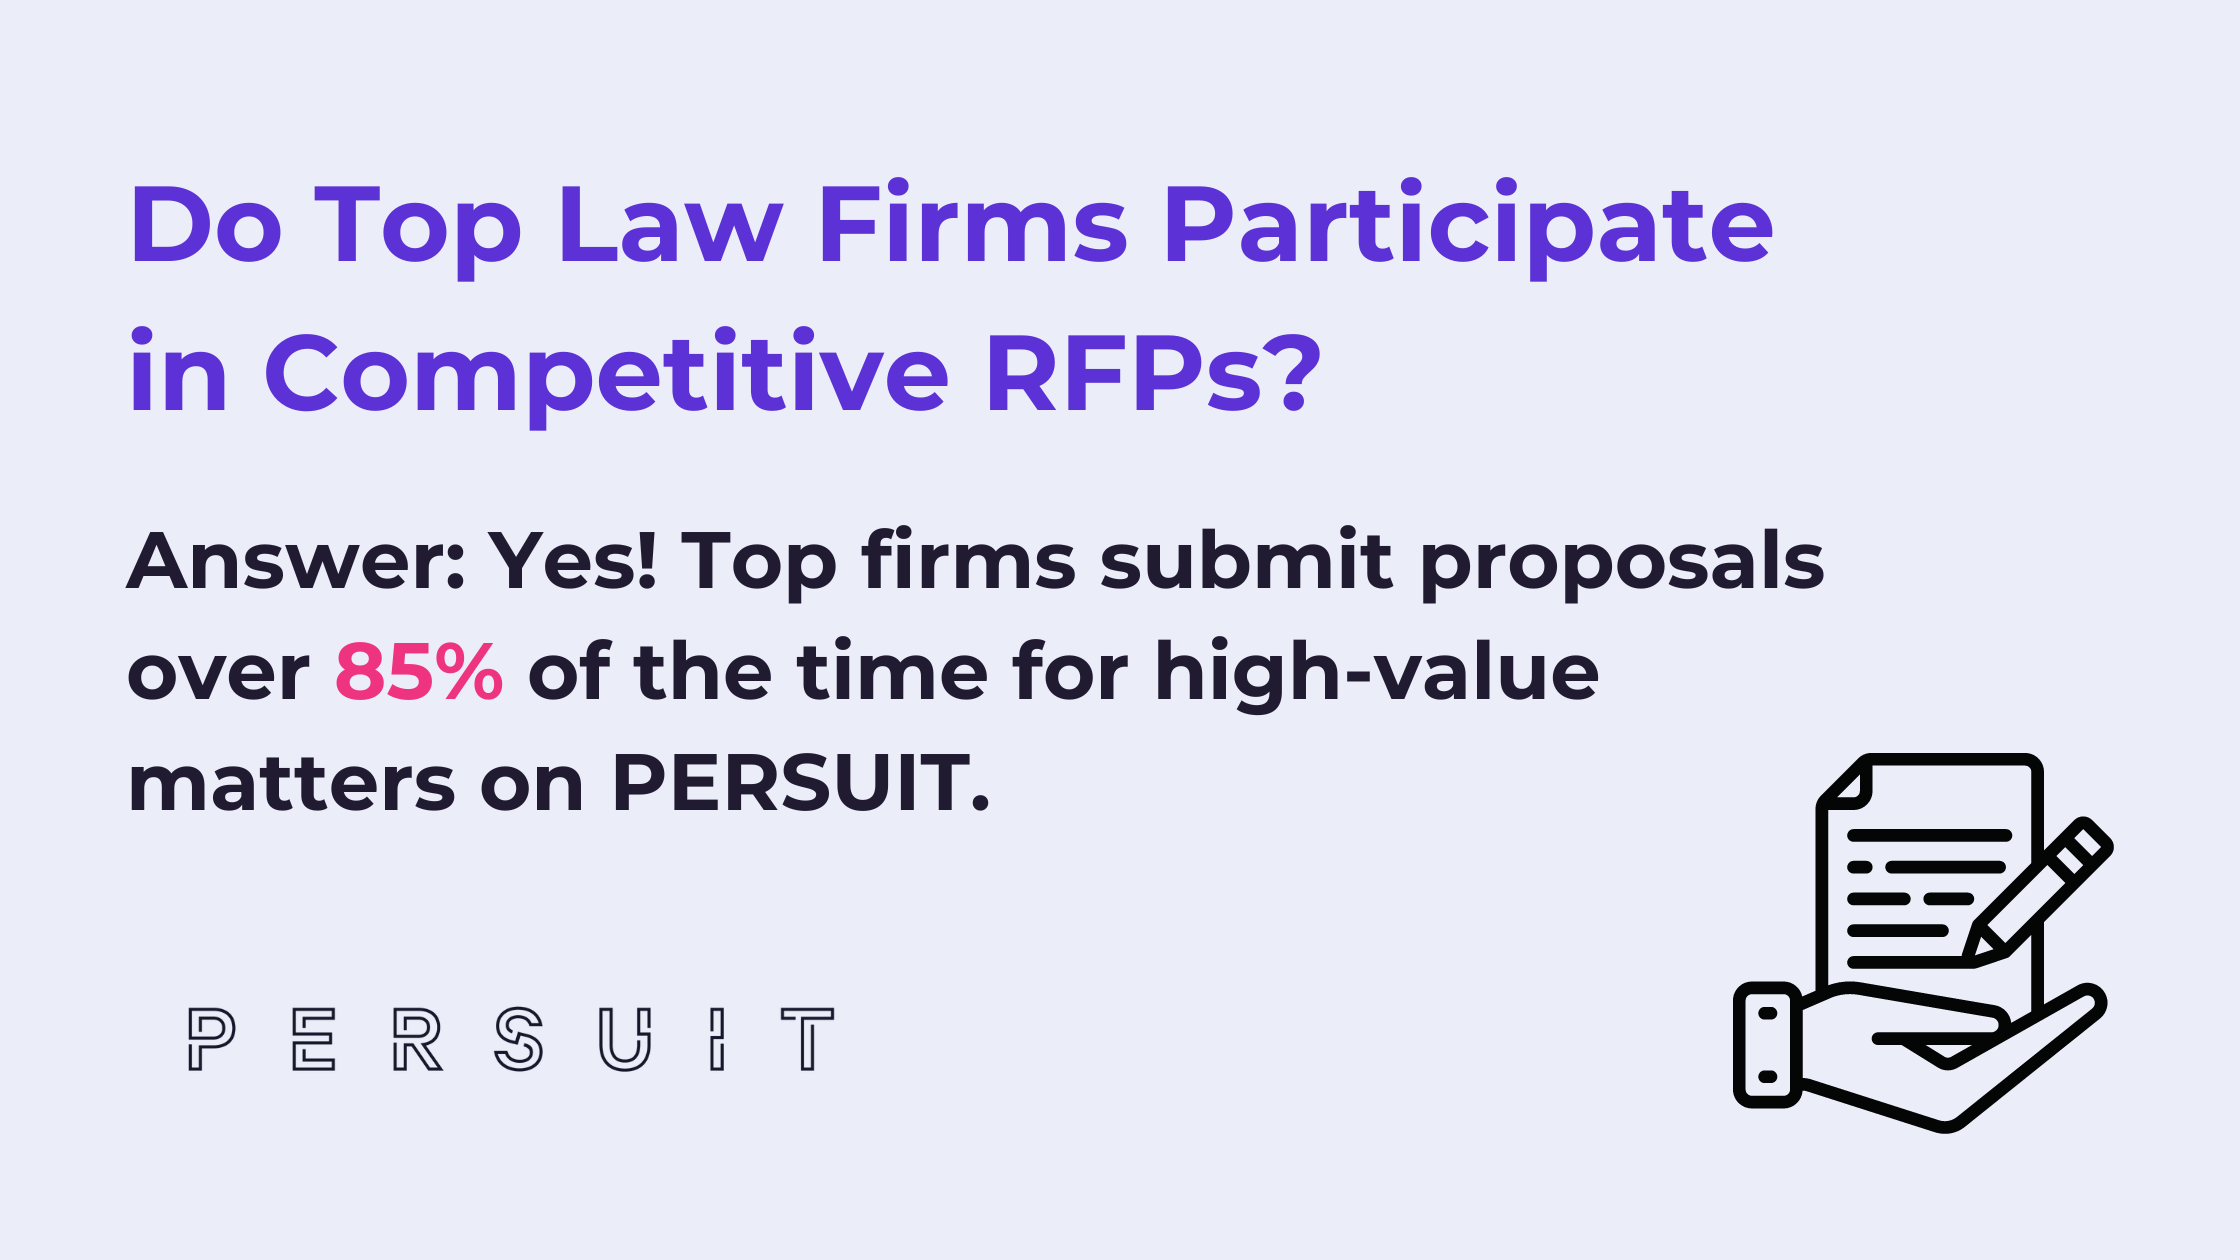 Do Top Law Firms Participate in Competitive RFPs?